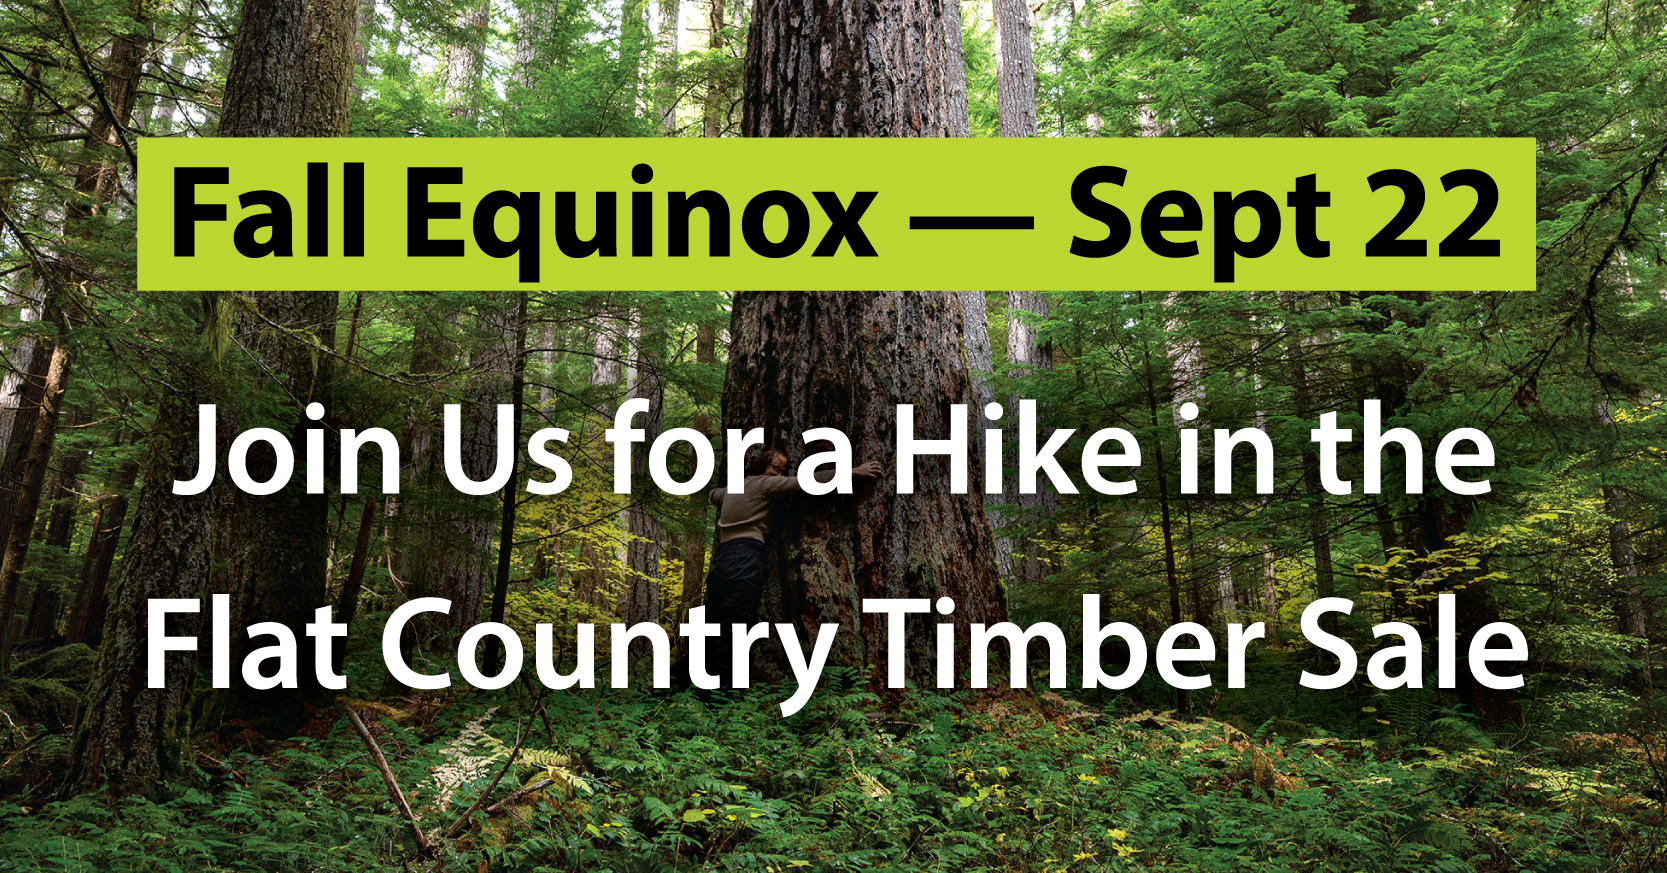 Join Us for a Fall Equinox Hike in the Flat Country Timber Sale — Thurs. Sept 22, 2022